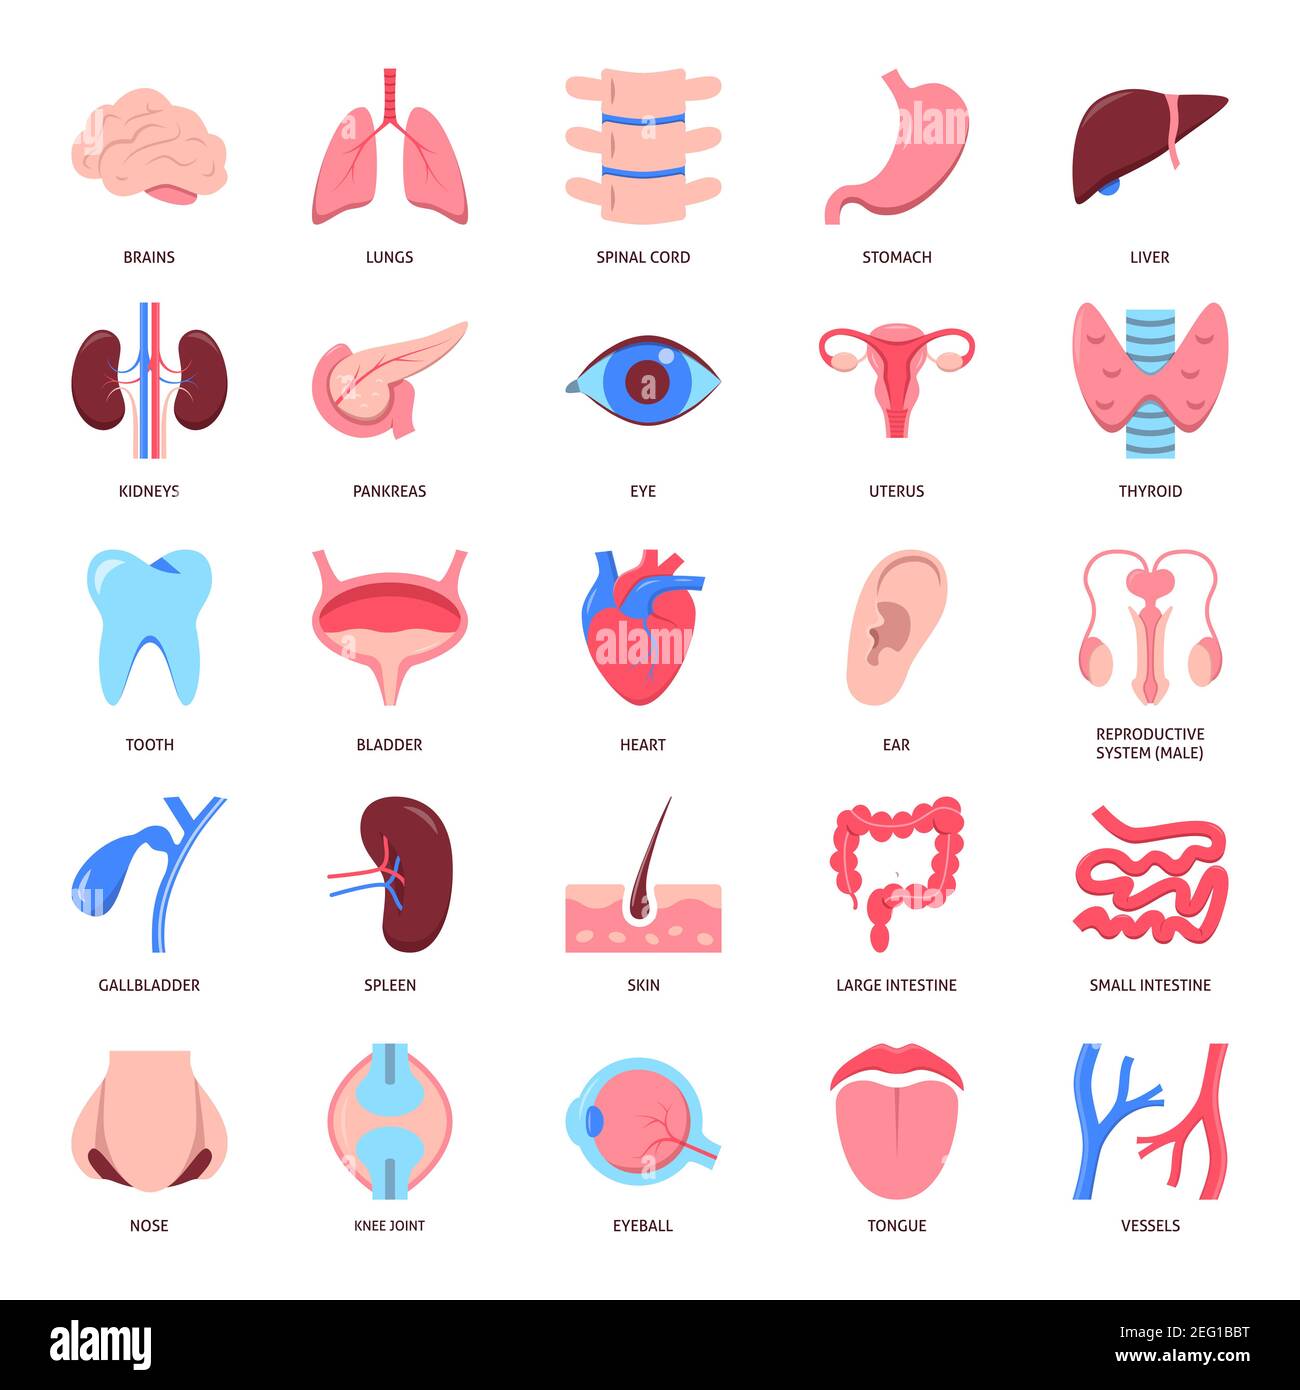 Human organs icon set in flat style. Medical anatomy symbols collection. Vector illustration. Stock Vector